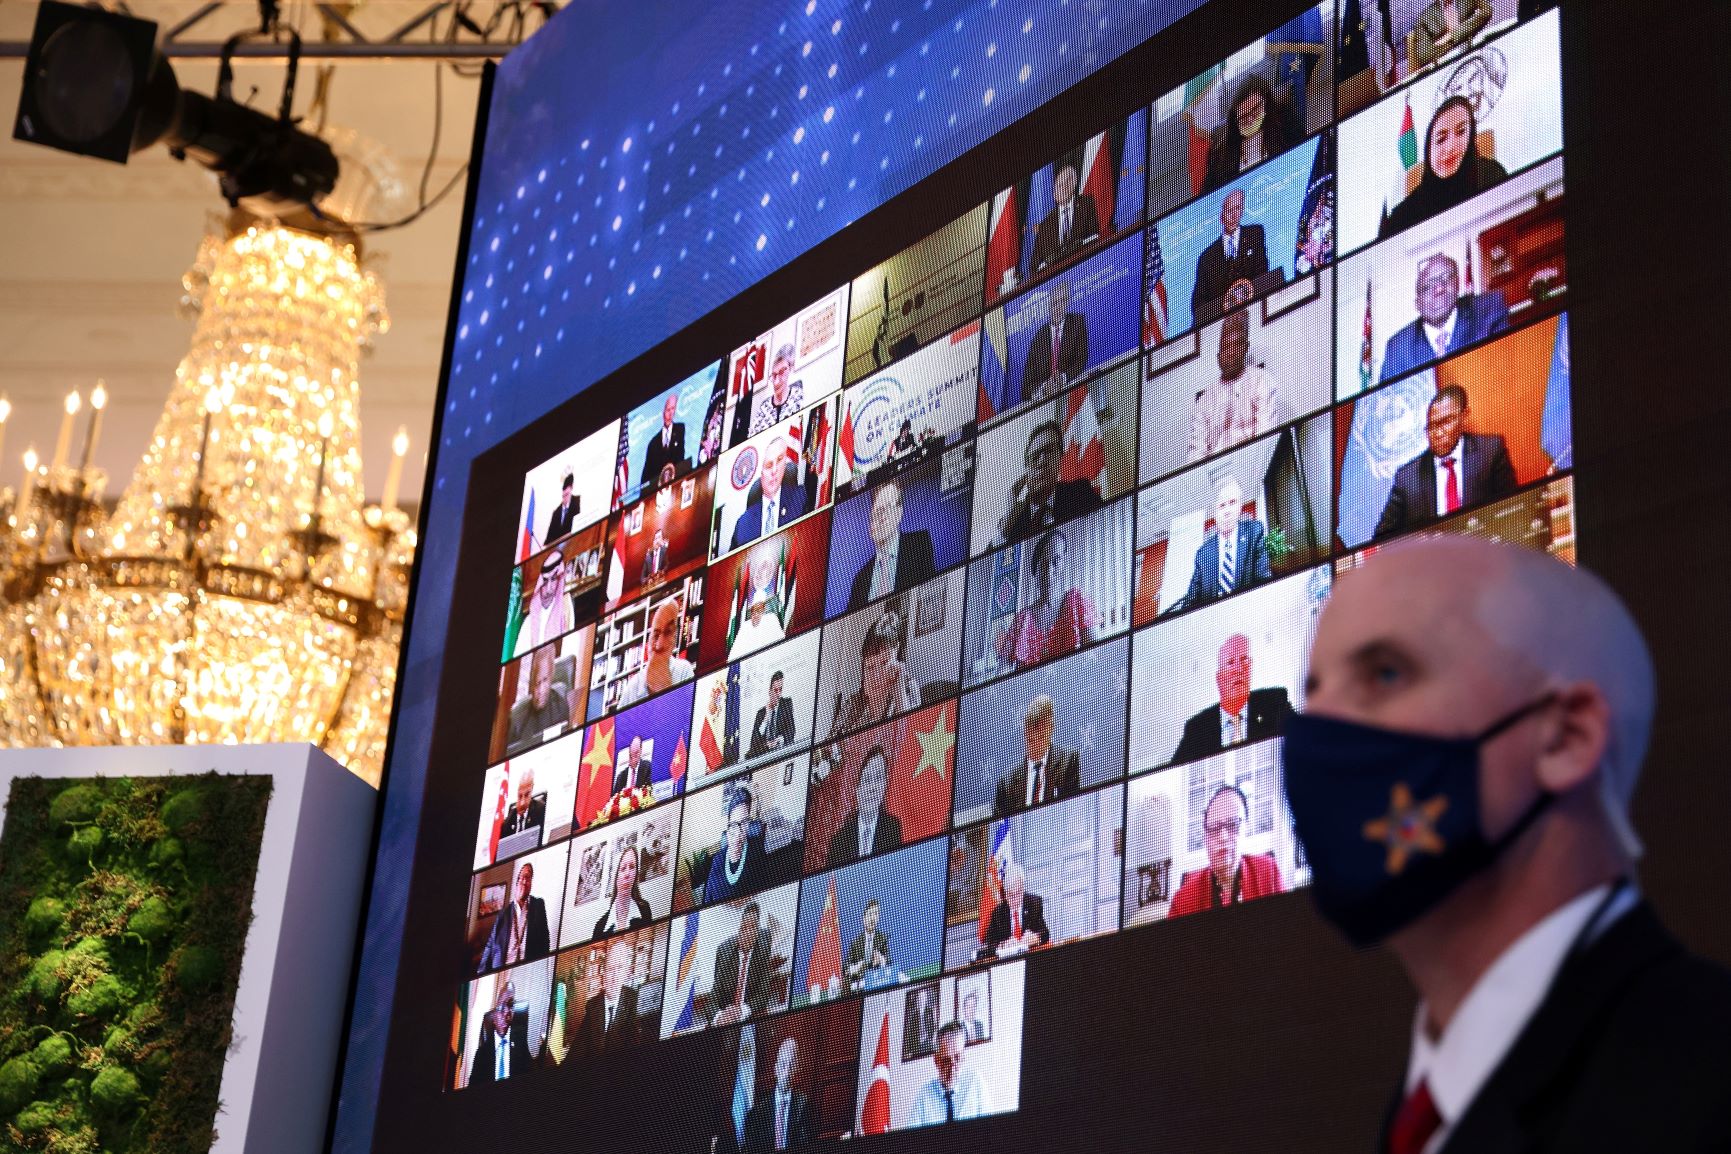 World leaders appear on a video screen during a virtual Climate Summit with world leaders in the East Room at the White House in Washington, DC, on April 23, 2021. REUTERS/Tom Brenner